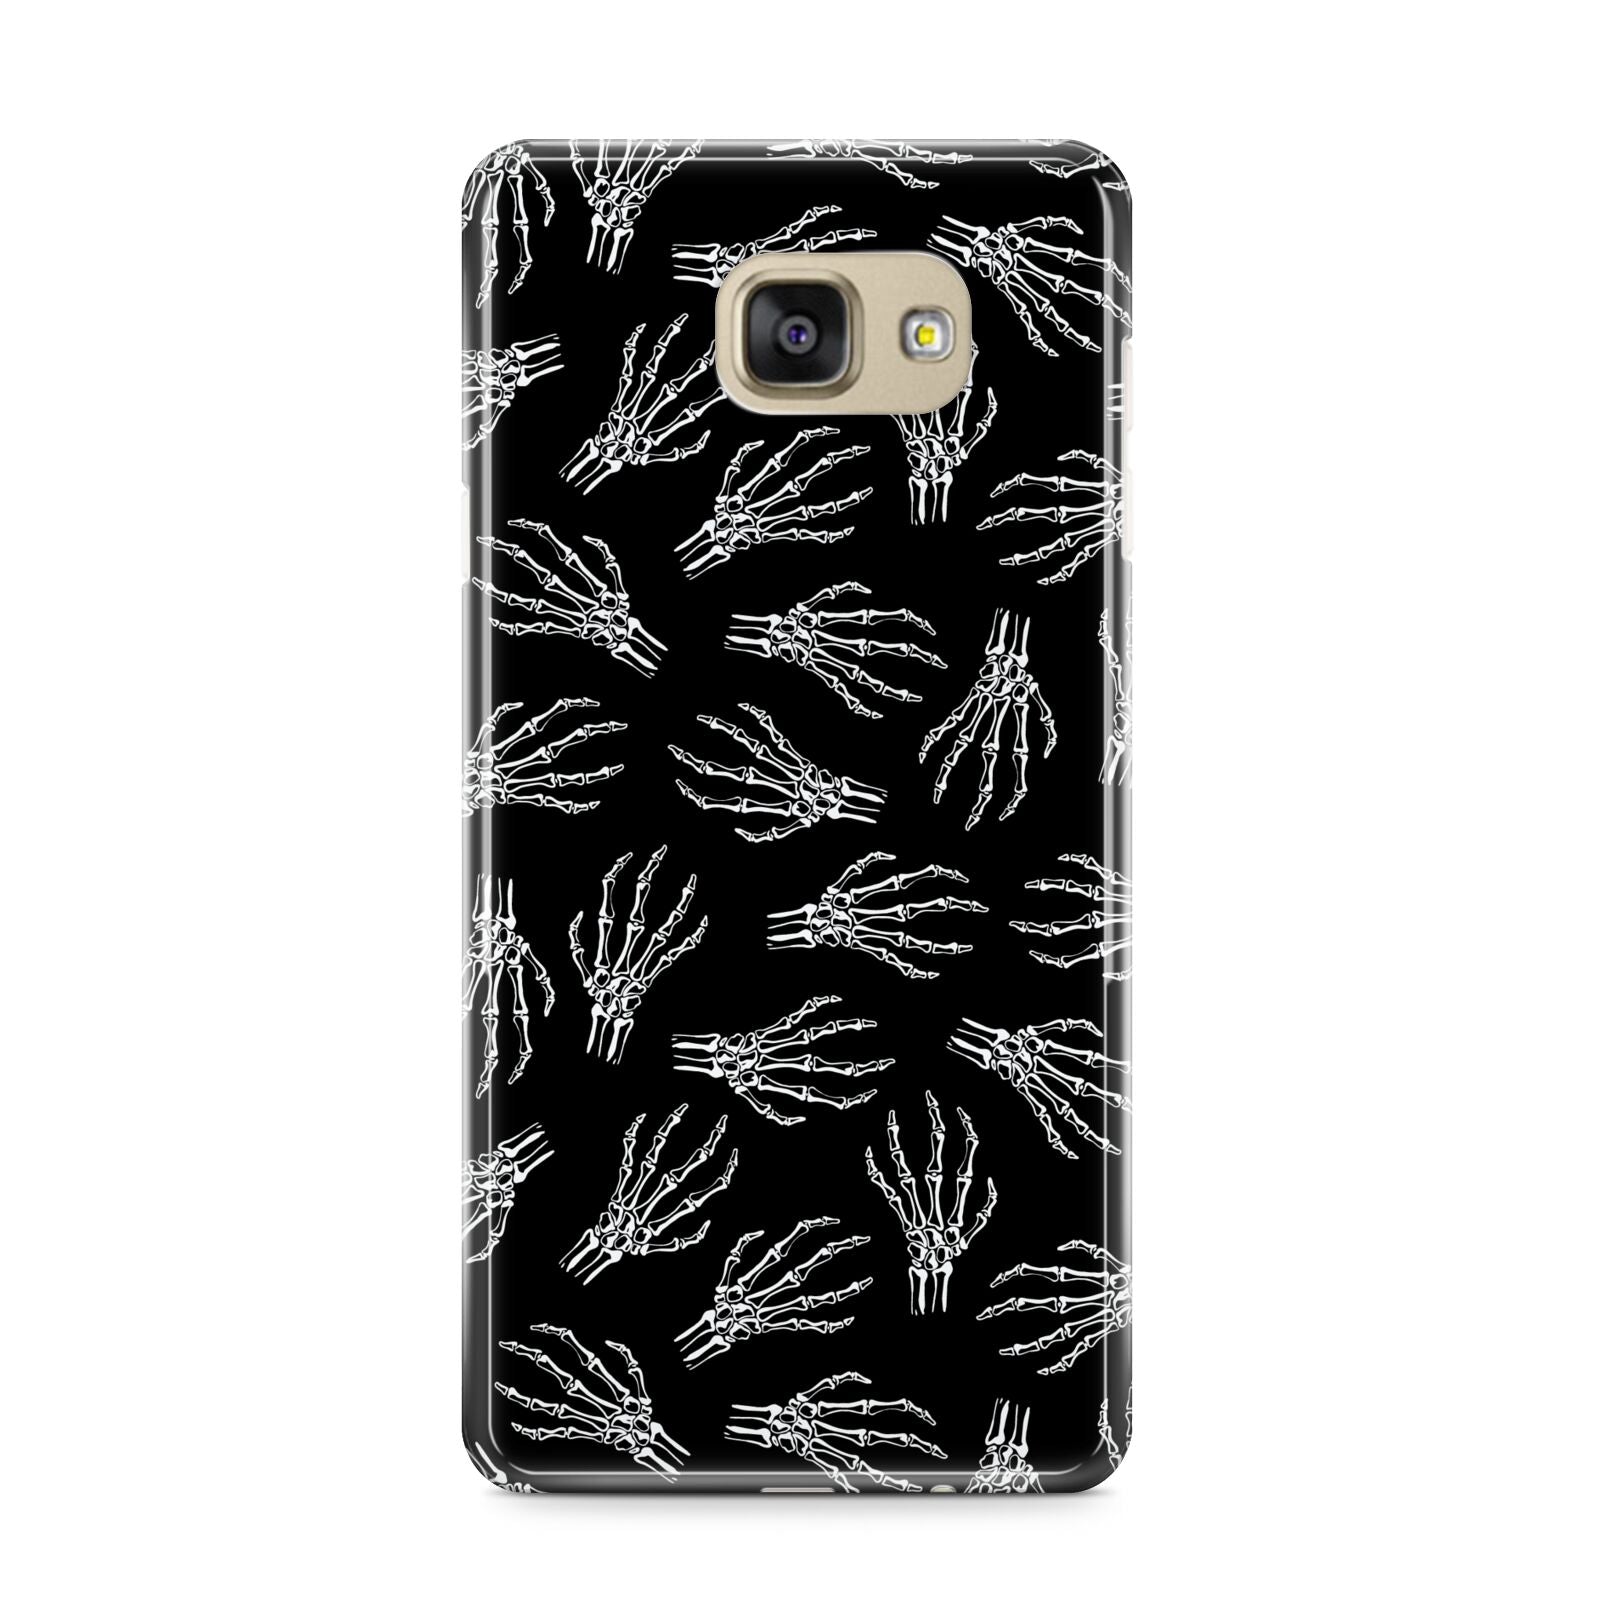 Skeleton Hands Samsung Galaxy A9 2016 Case on gold phone